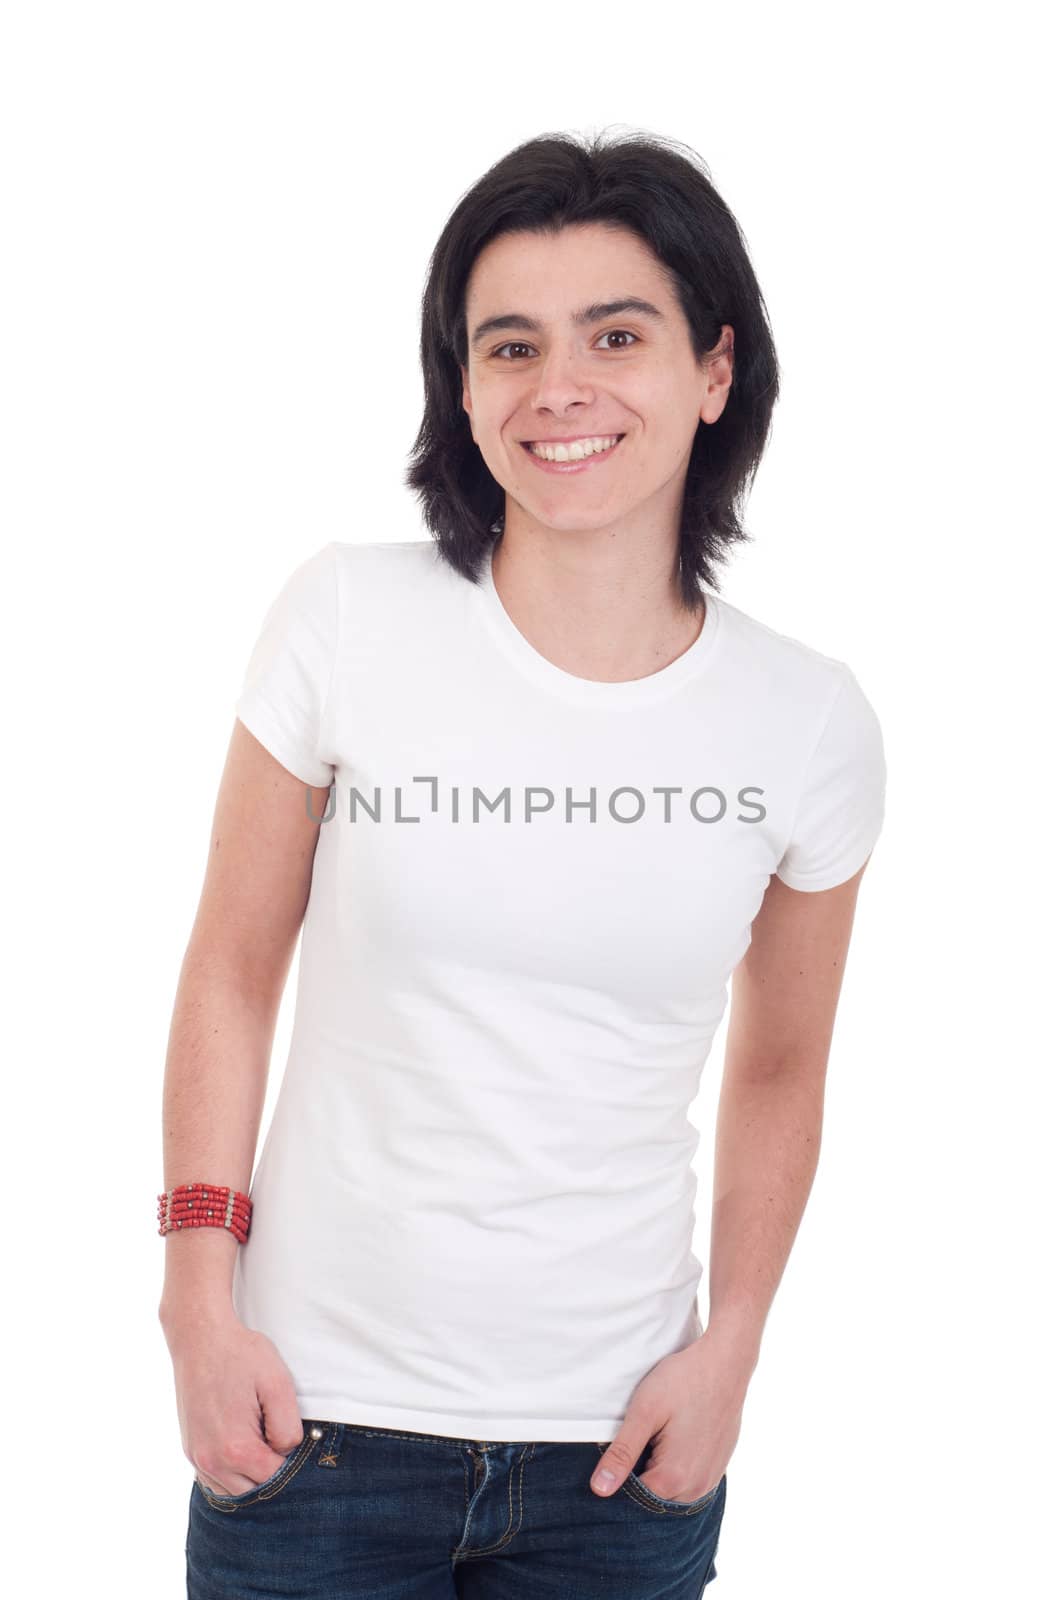 smiling casual woman portrait isolated on white background 